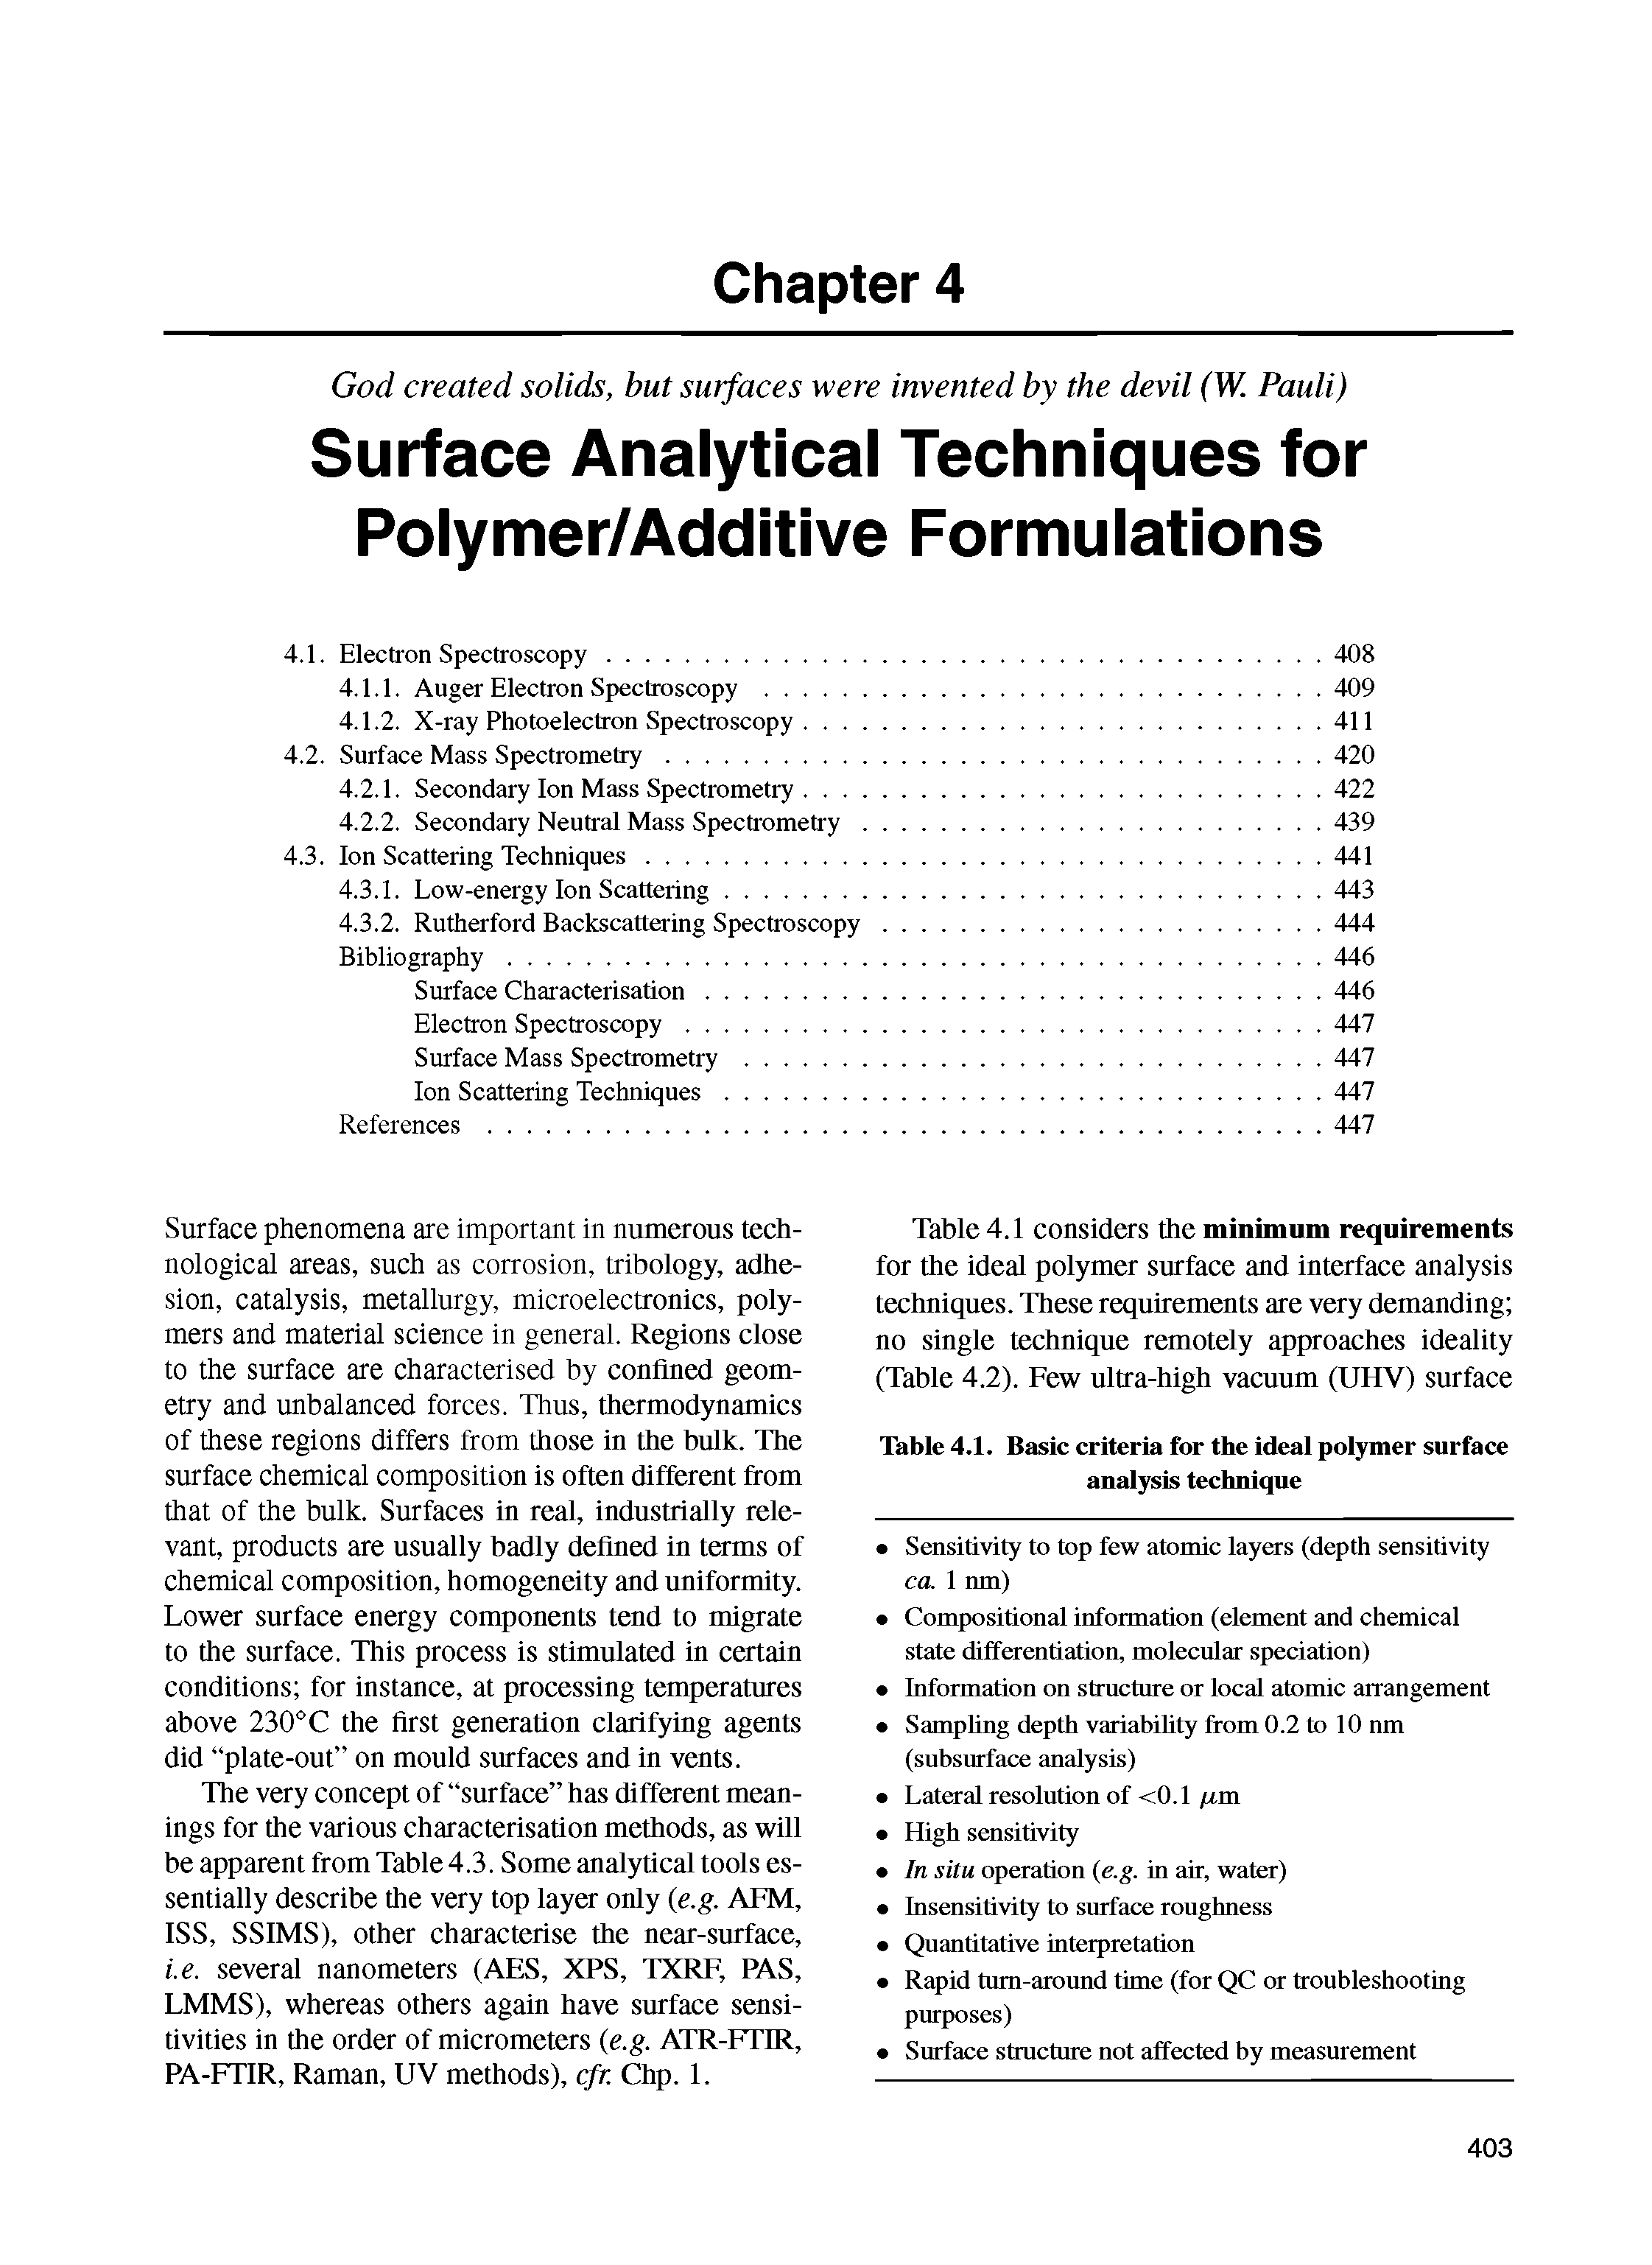 Table 4.1. Basic criteria for the ideal polymer surface analysis technique...